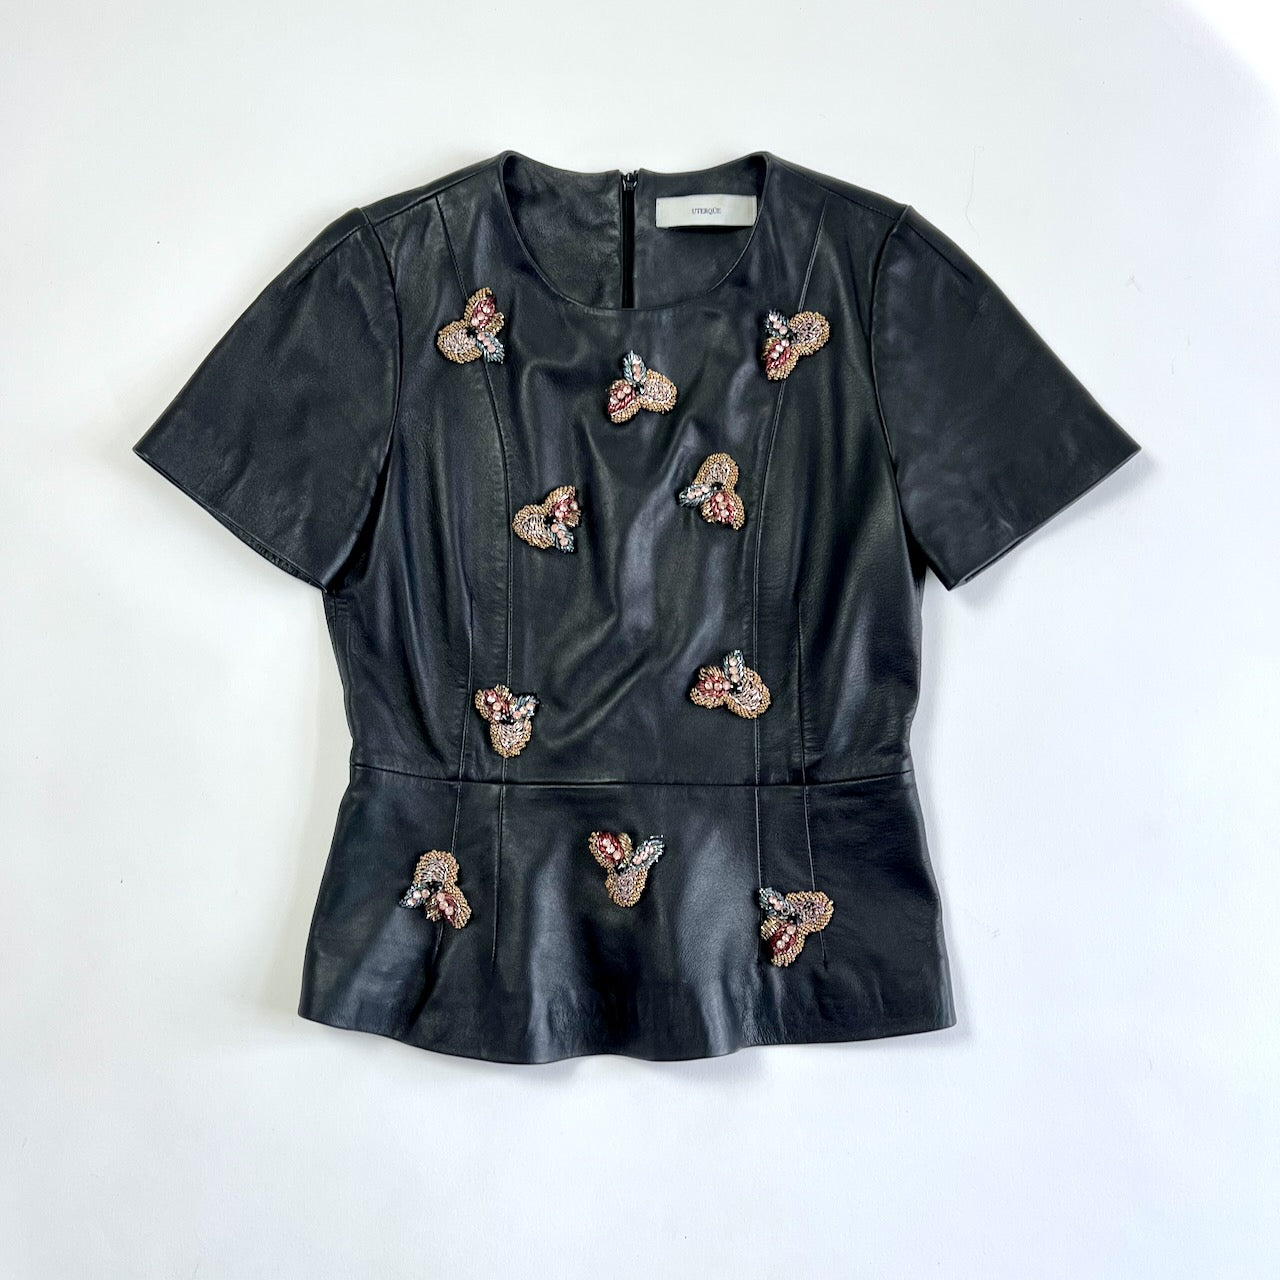 Uterque embellished leather top 